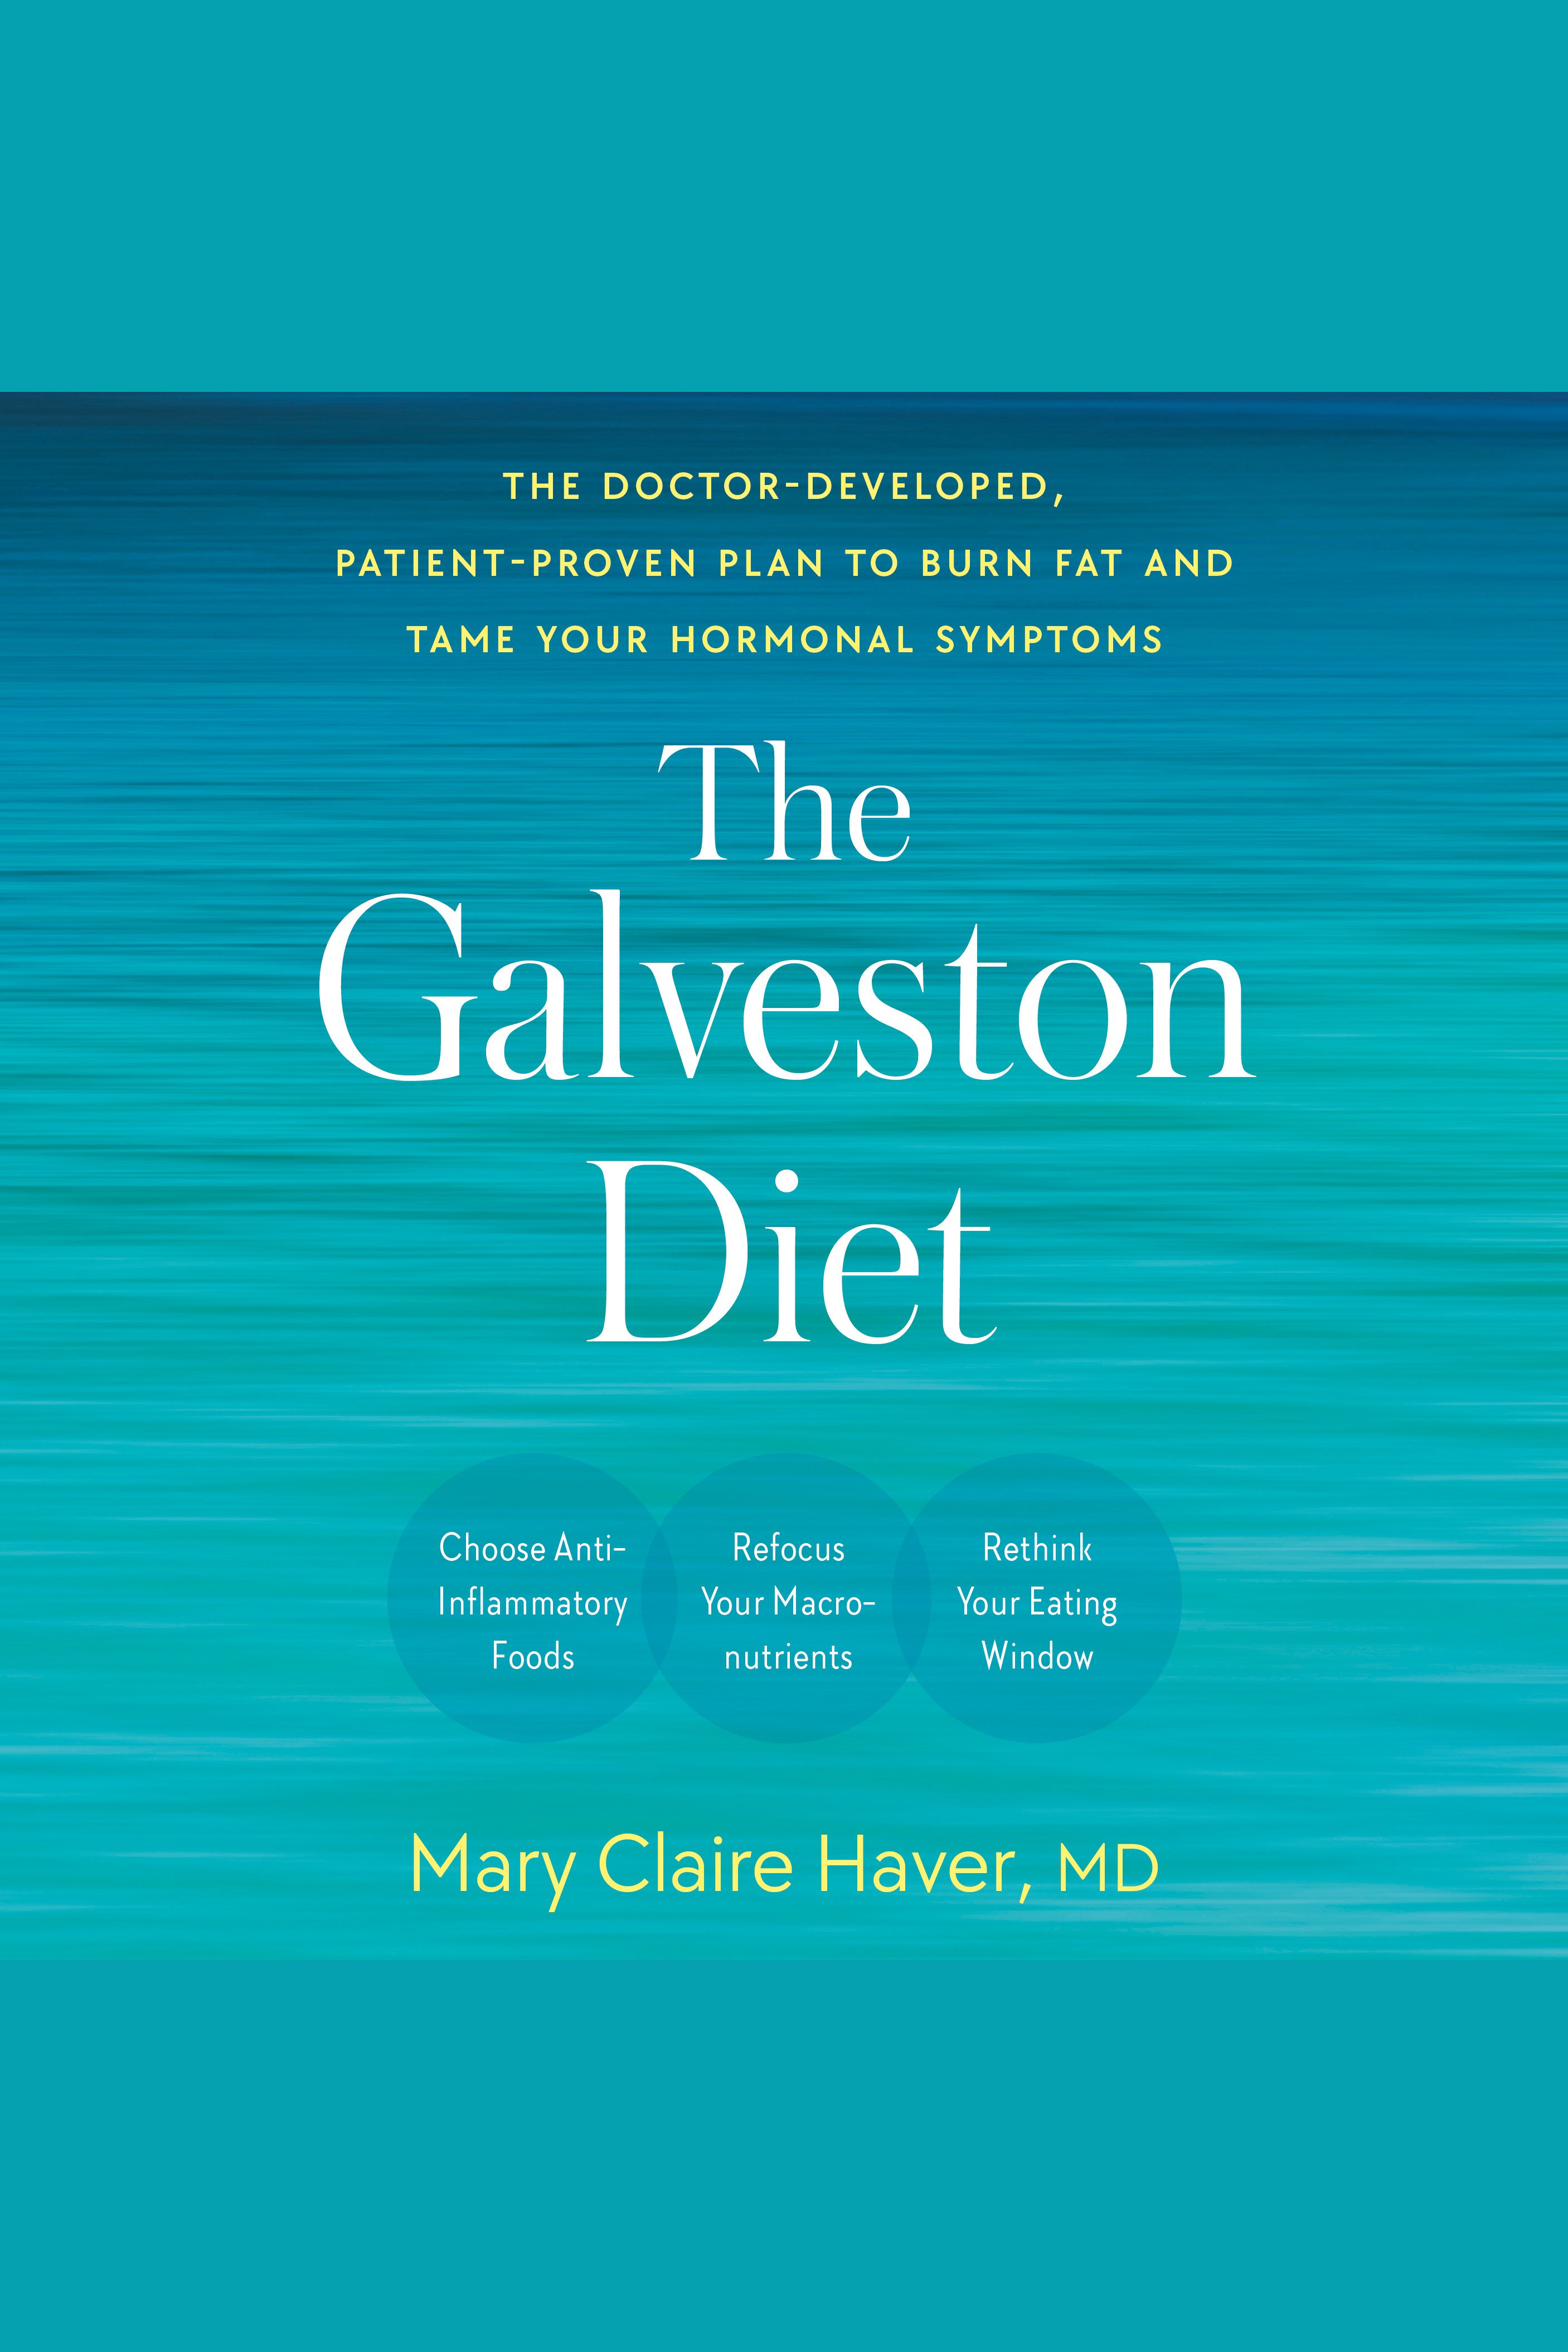 Galveston Diet, The The Doctor-Developed, Patient-Proven Plan to Burn Fat and Tame Your Hormonal Symptoms